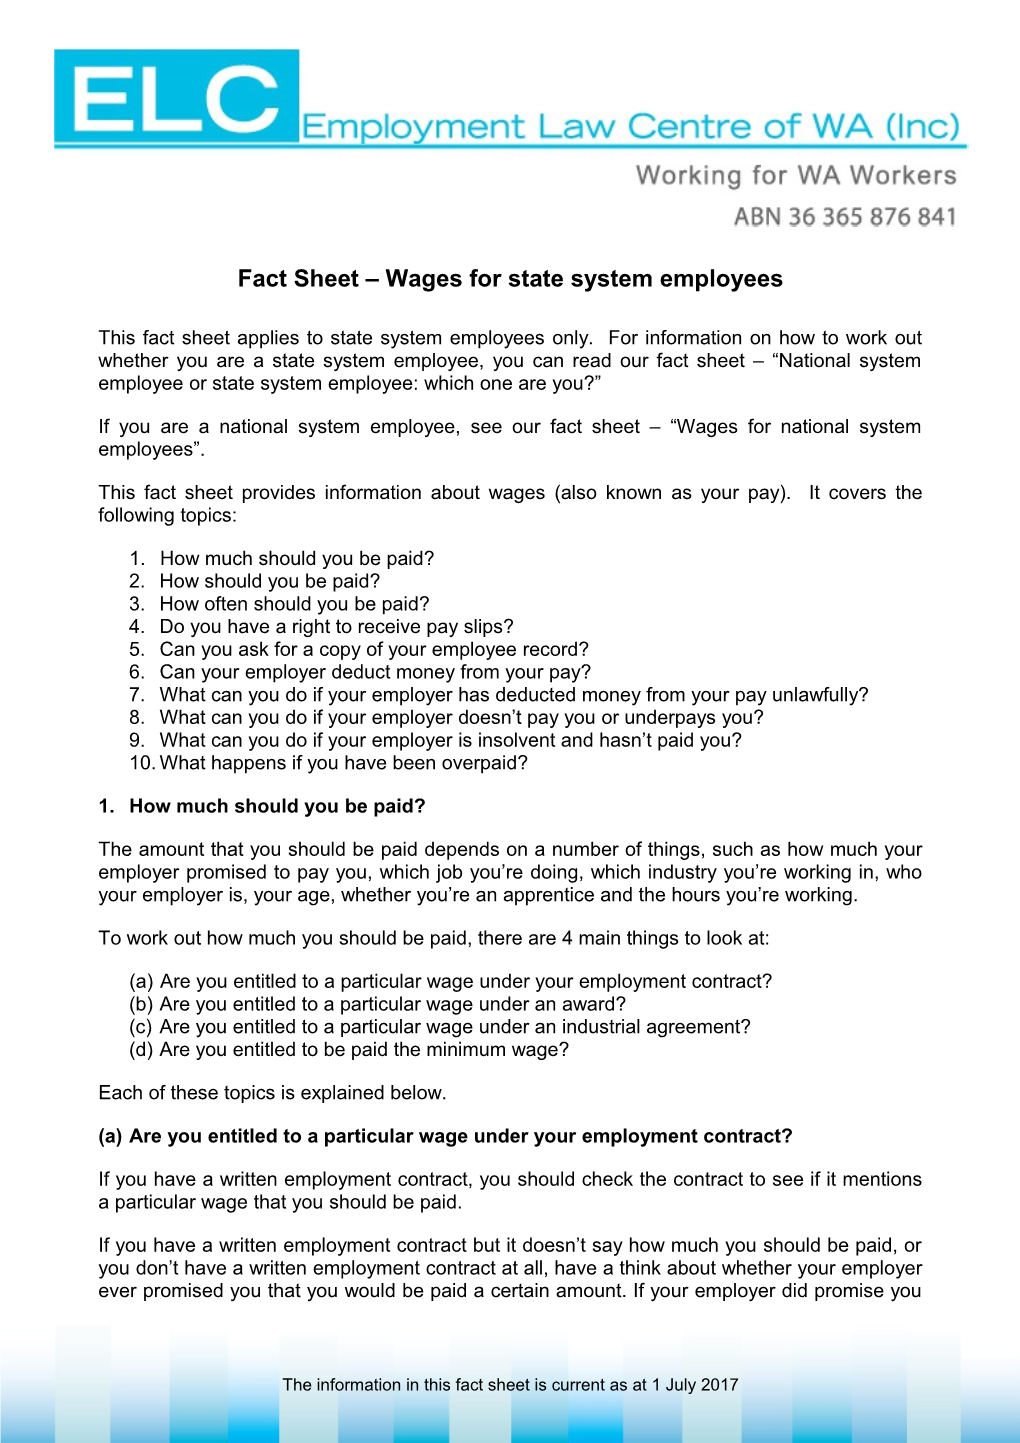 Fact Sheet Wages for State System Employees